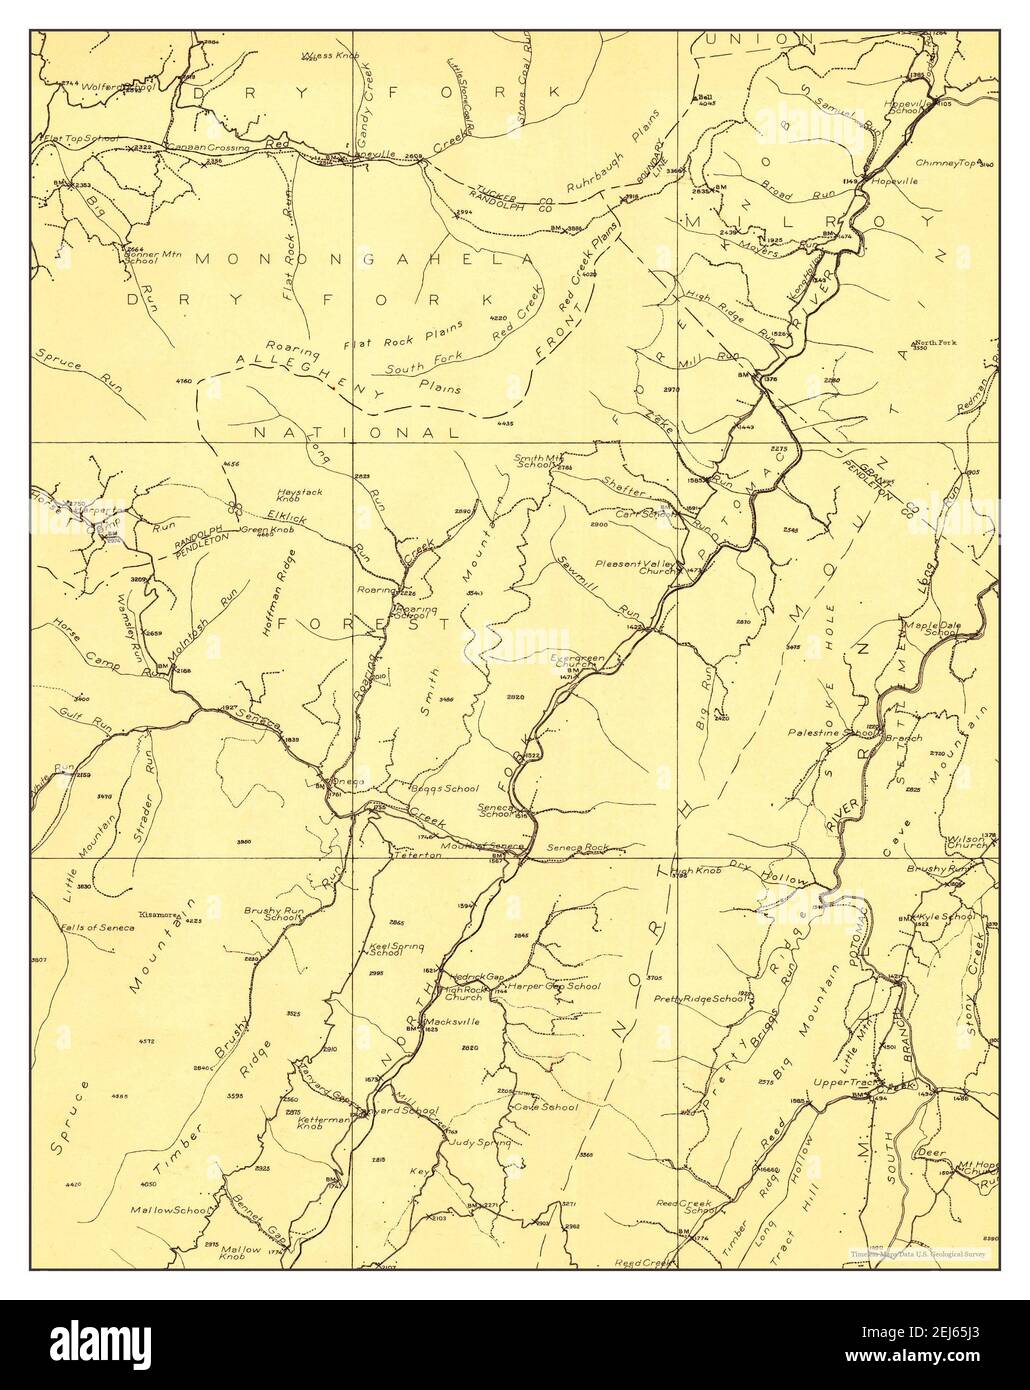 Onego, West Virginia, map 1921, 1:48000, United States of America by Timeless Maps, data U.S. Geological Survey Stock Photo